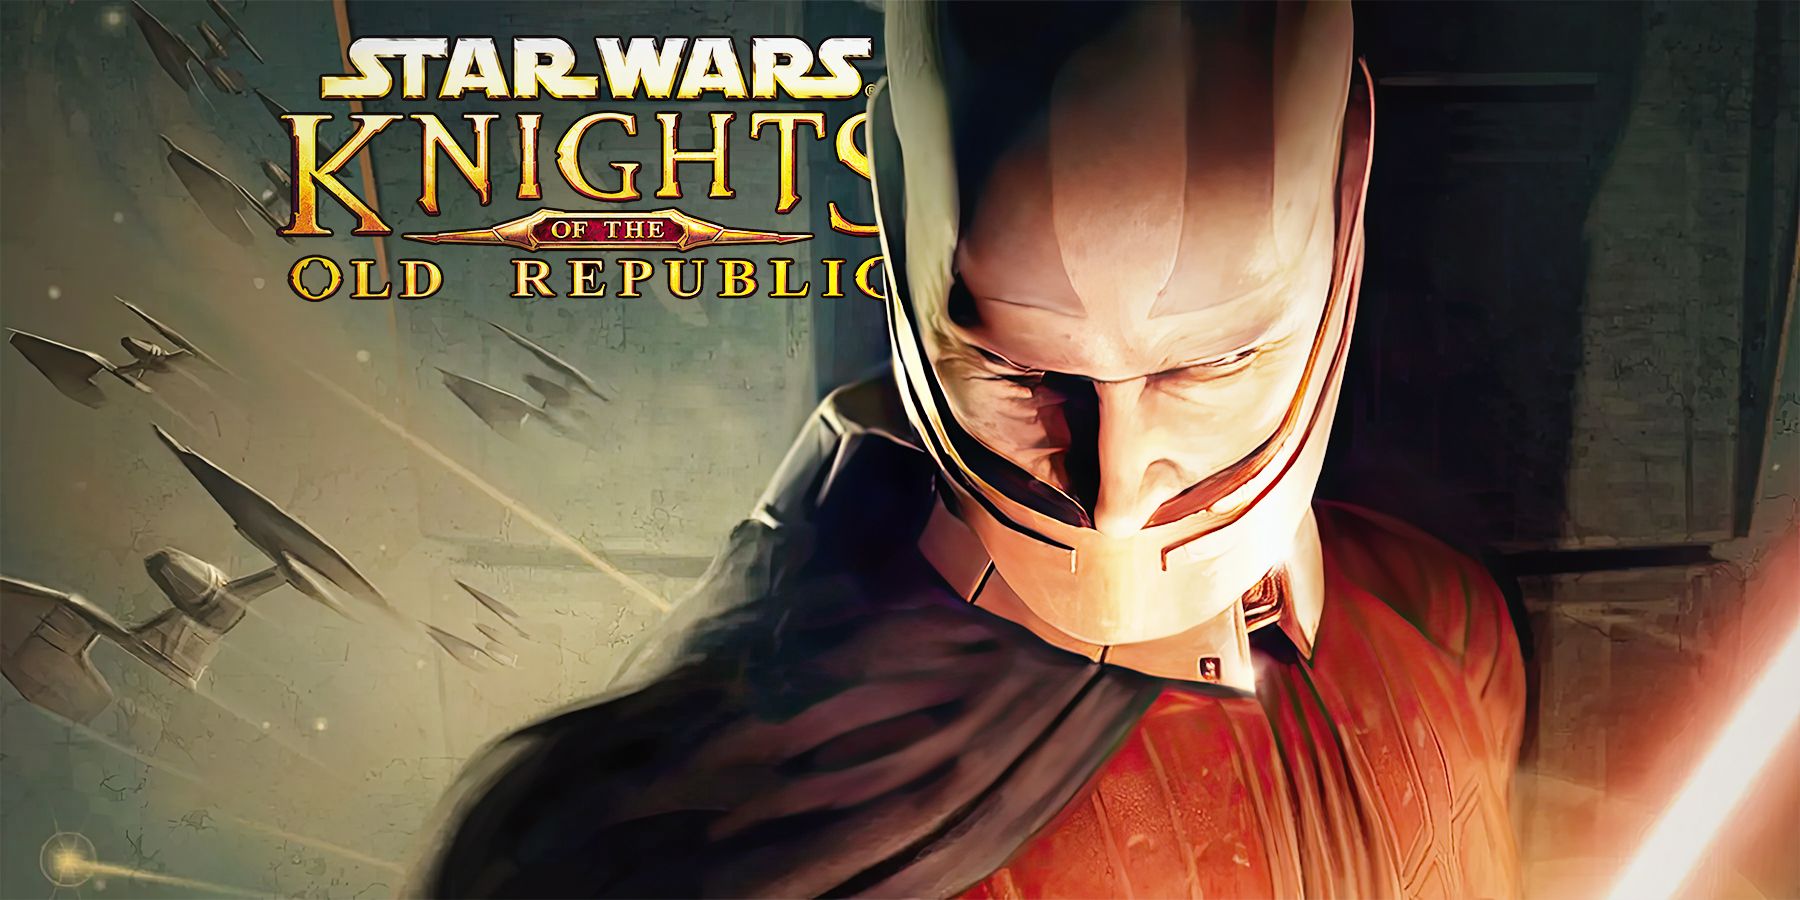 Star Wars Knights of the Old Republic KOTOR upscaled cover artwork crop Revan in front of game logo